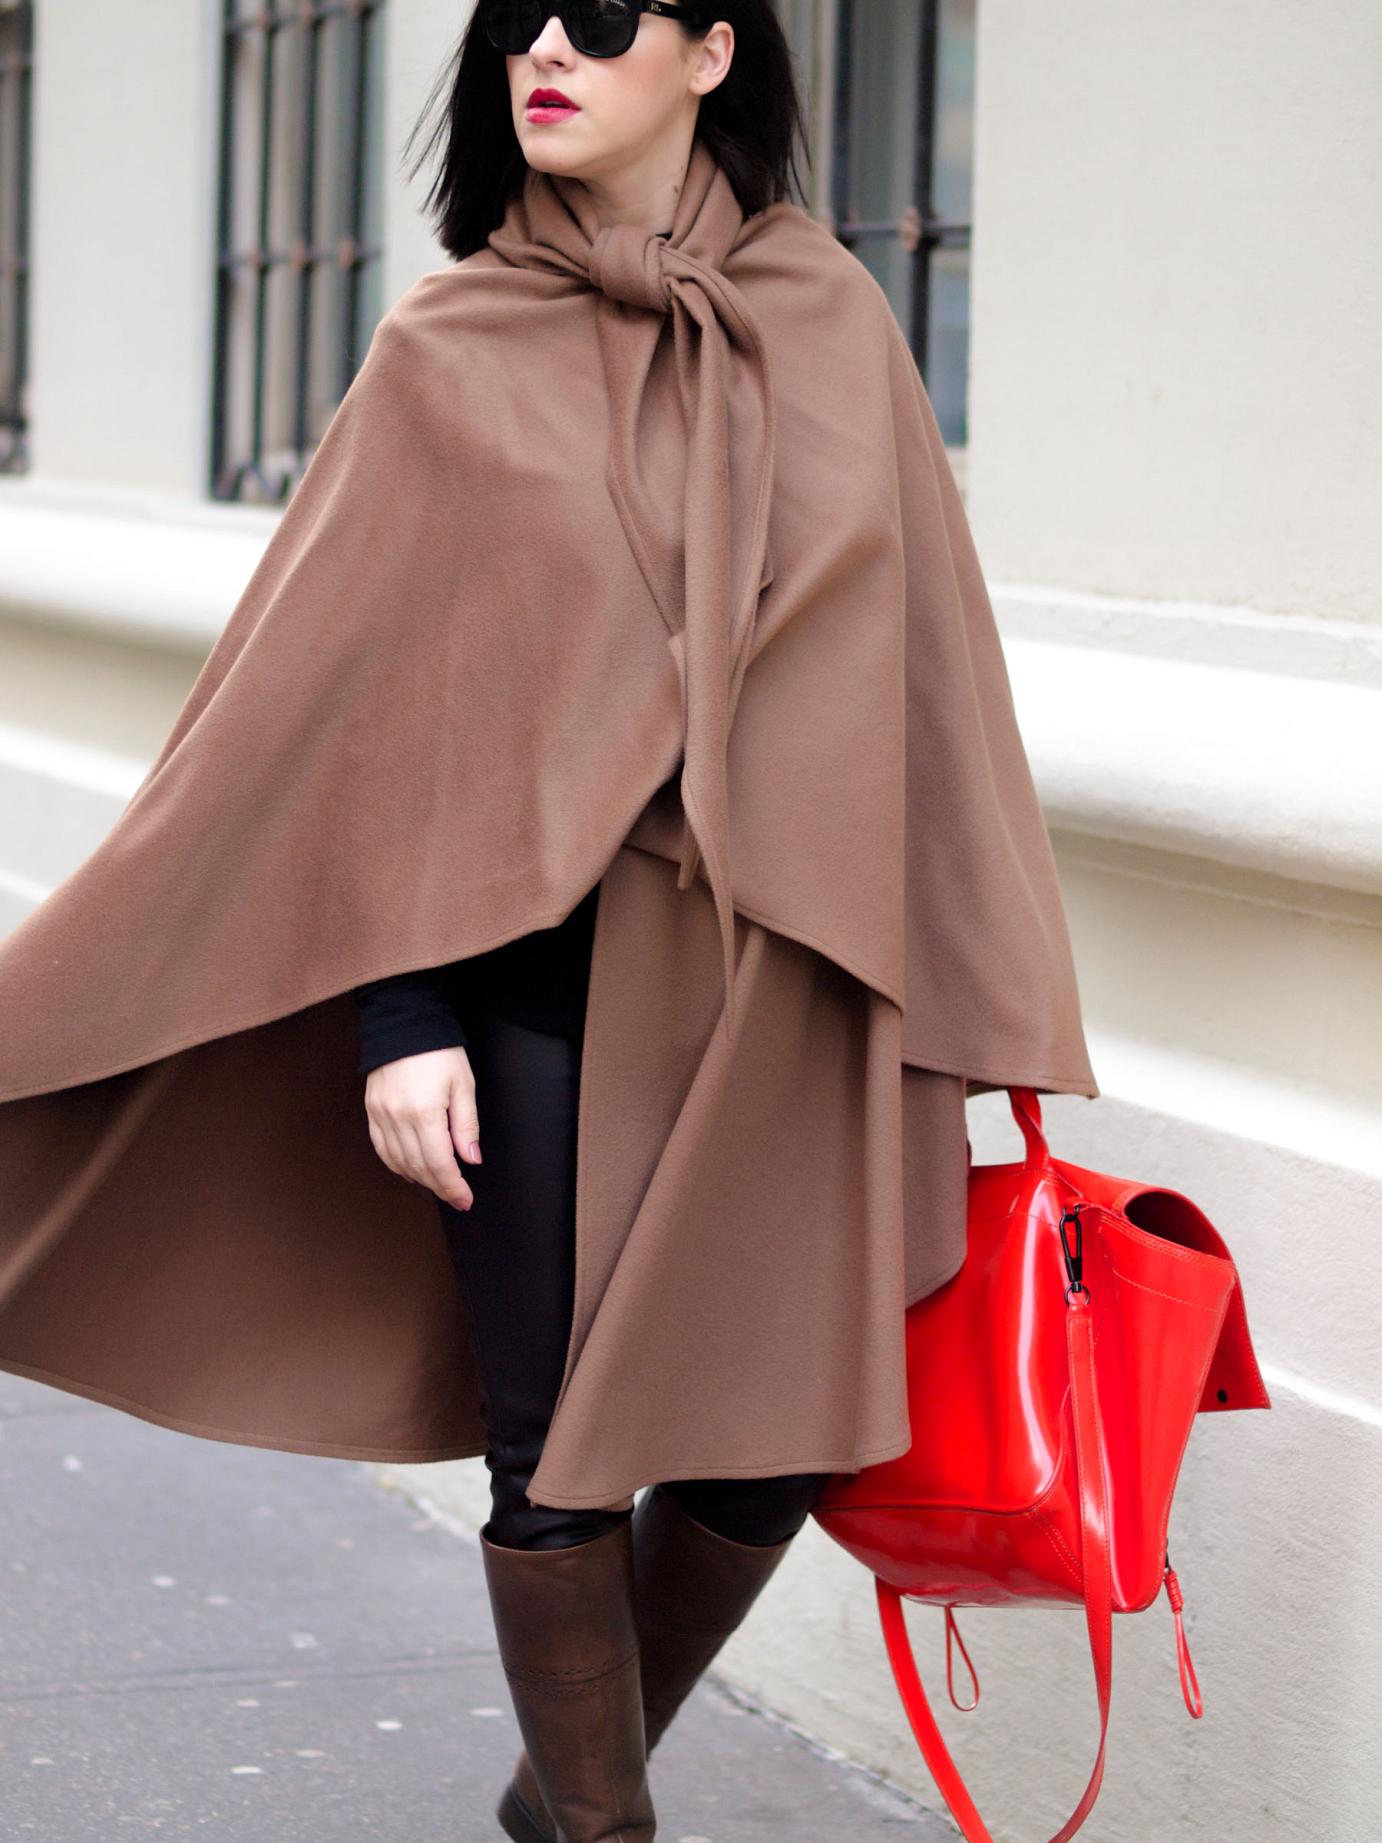 bittersweet colours, street style, winter coats, cape, benetton boots, 3.1 phillip lim bag, winter street style, maternity style, 27 weeks, New York, leather leggings, camel cape 